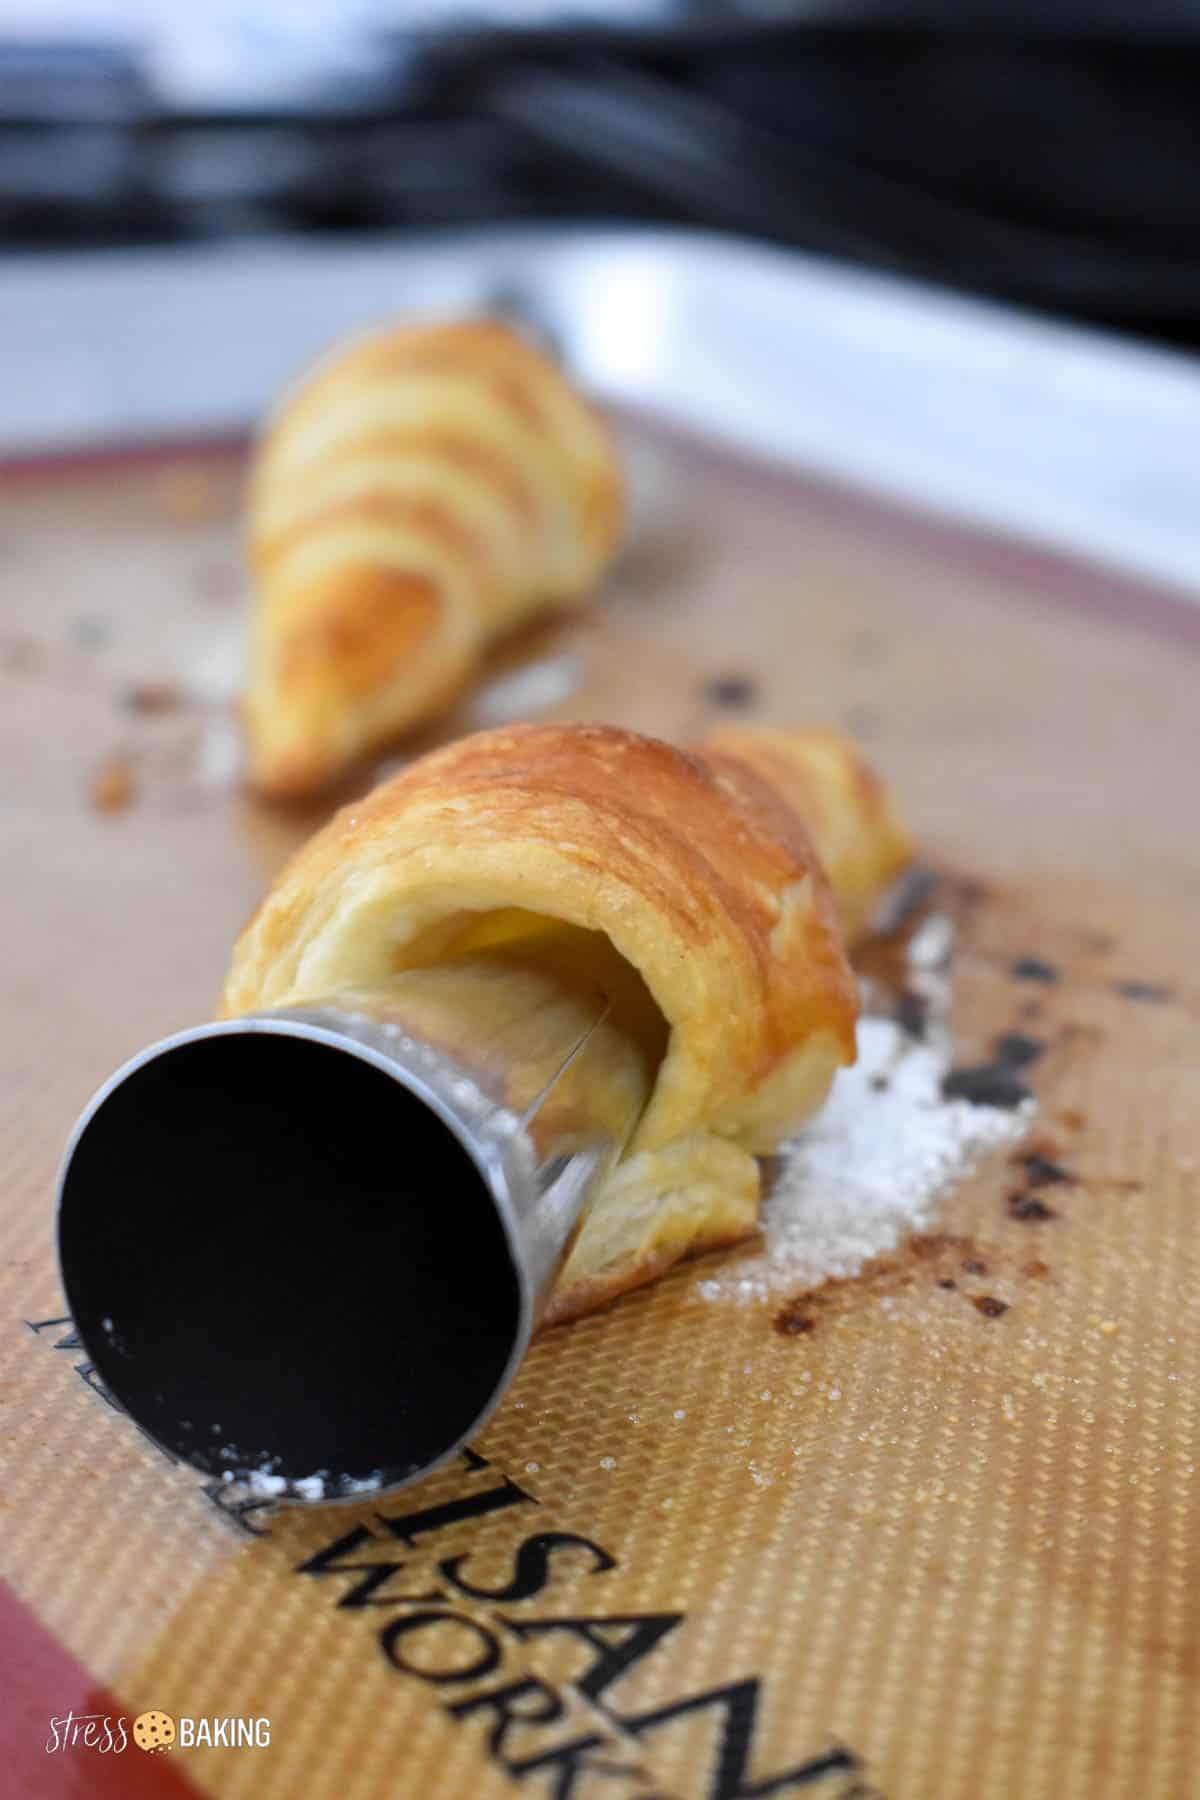 A metal pastry cone sticking out of a tube of golden pastry